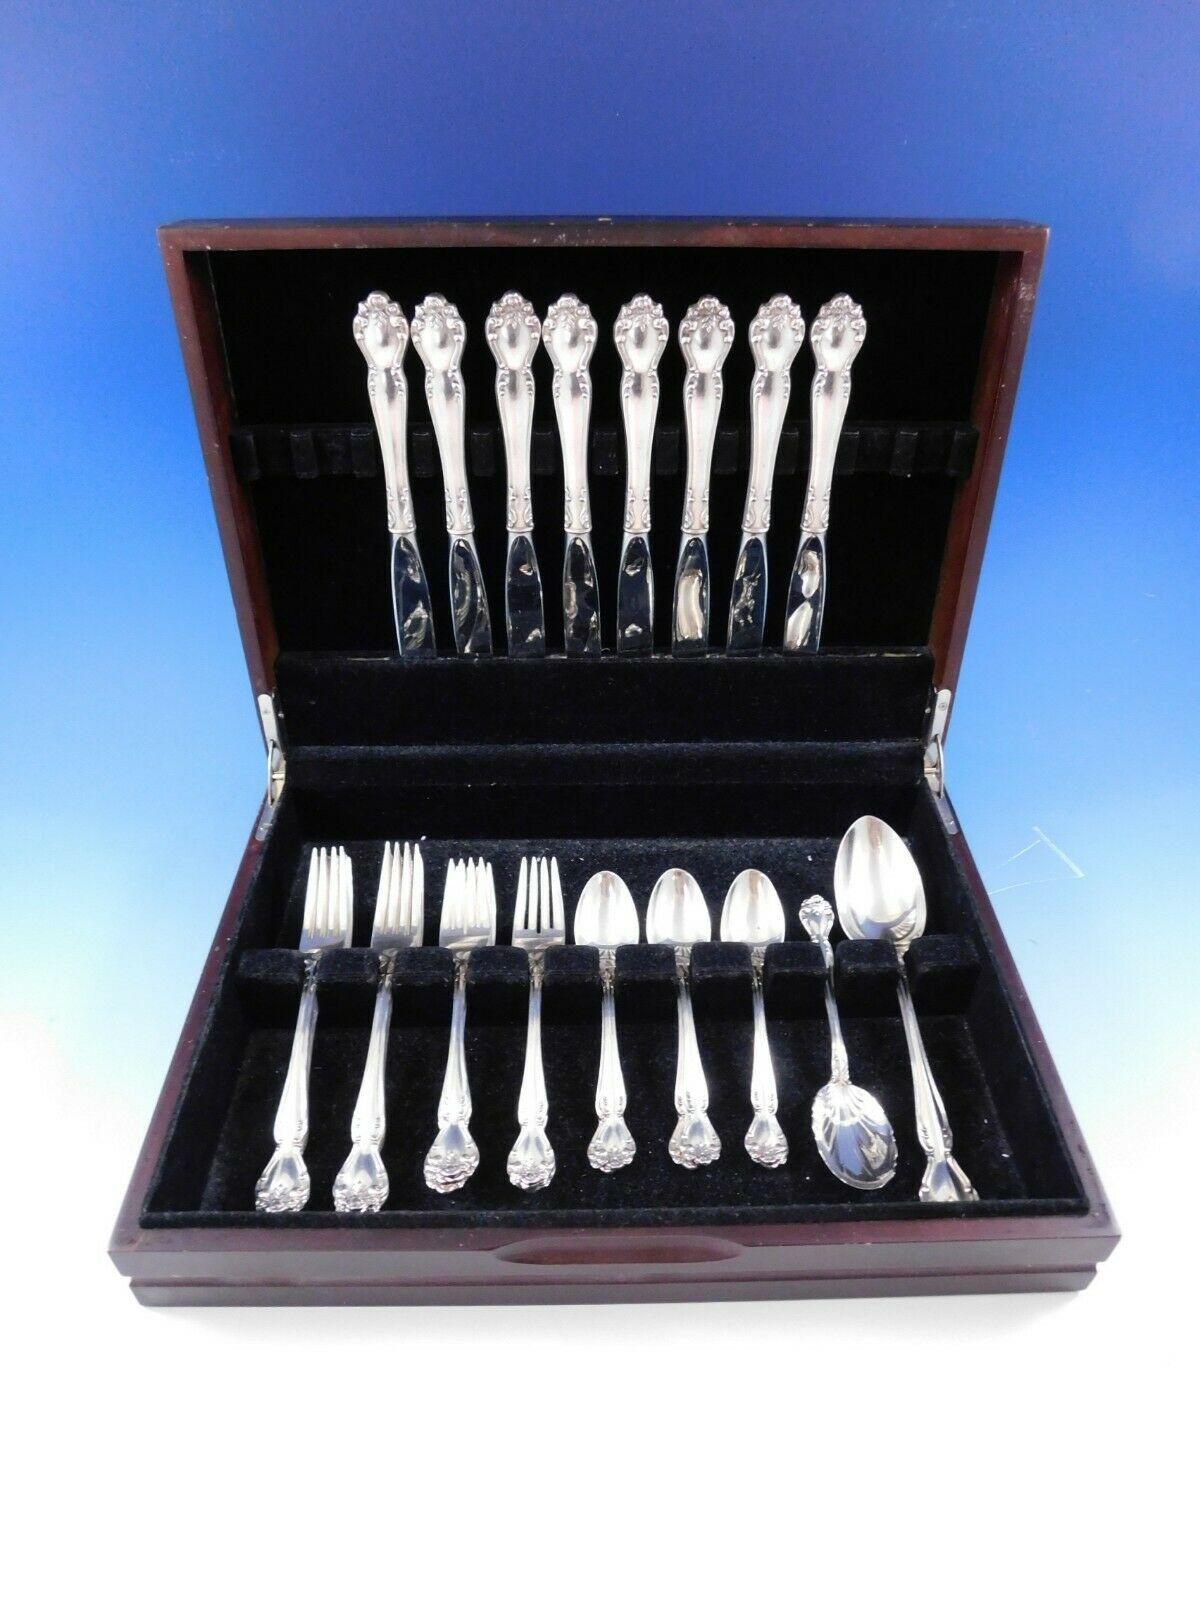 Beautiful secret garden by Gorham sterling silver flatware set - 34 pieces. This set includes:

8 knives, 9 1/4